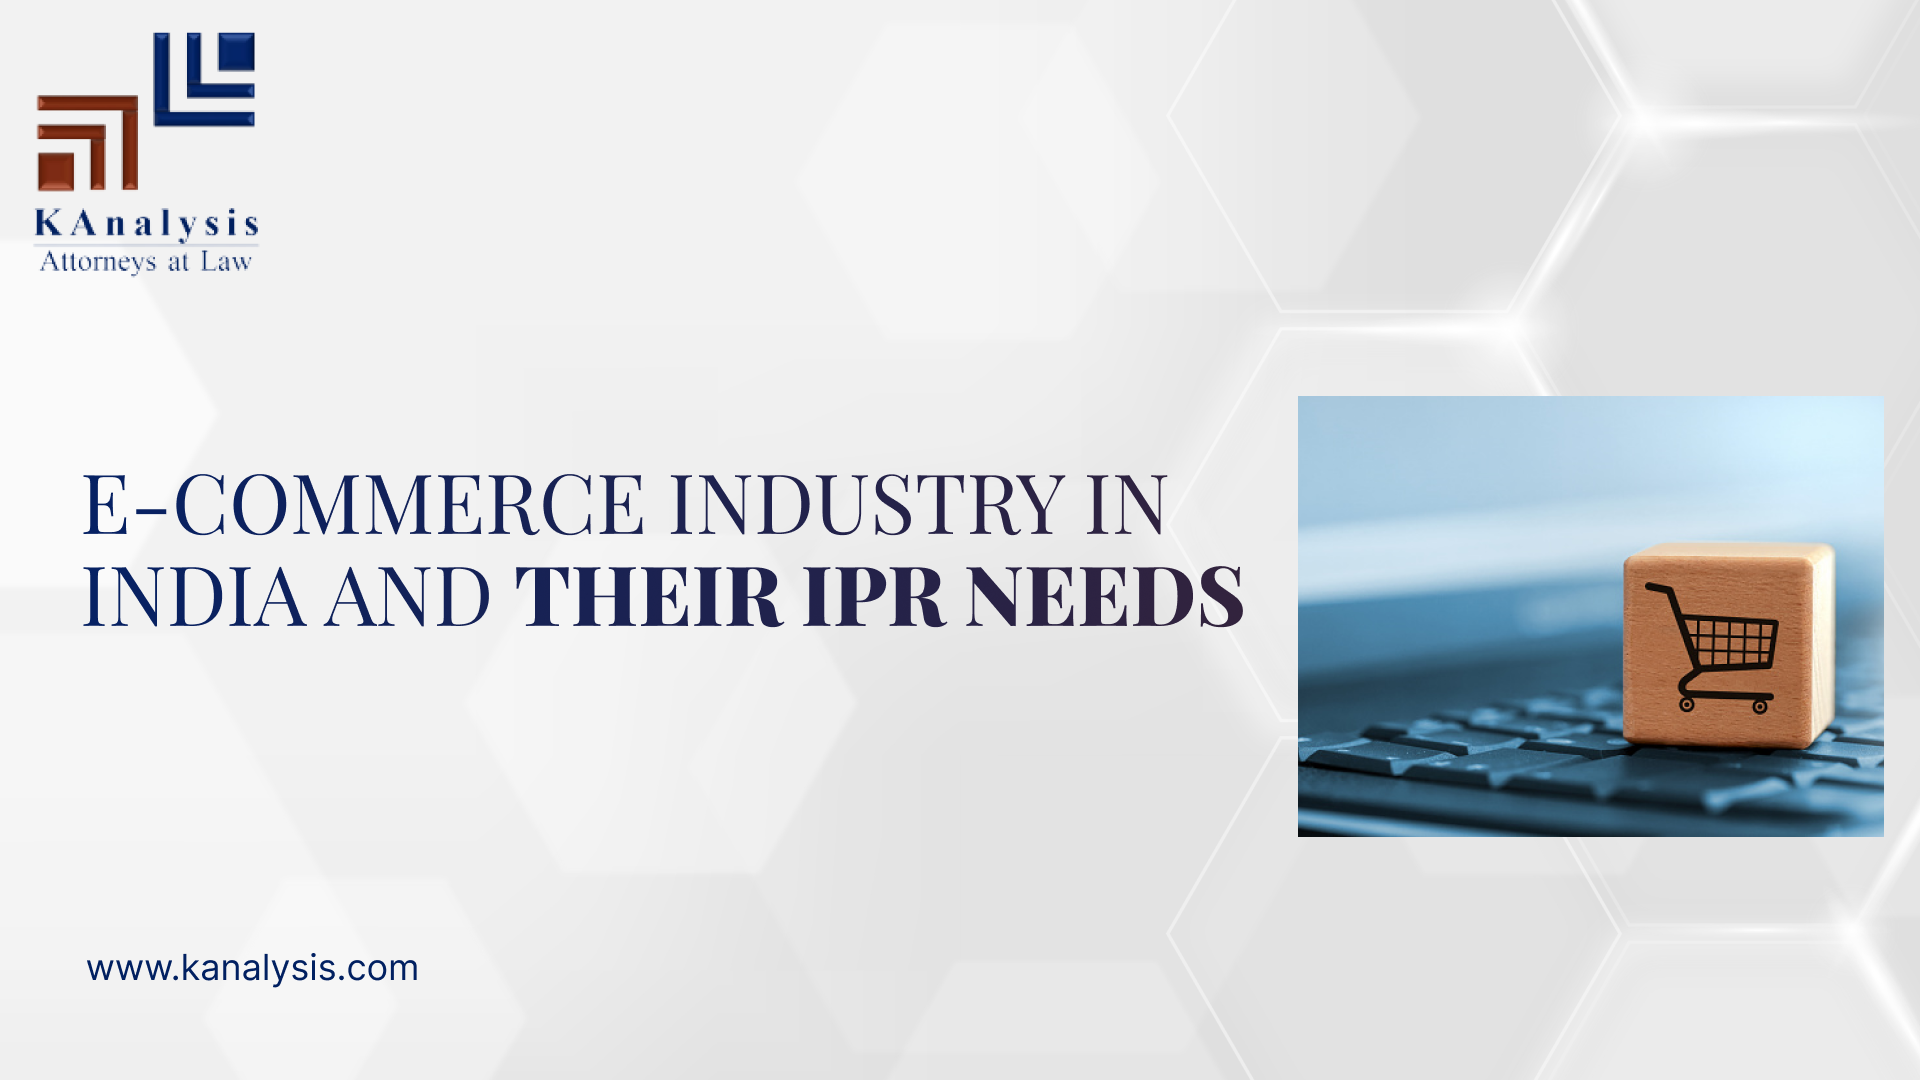 <strong><u>E-COMMERCE INDUSTRY IN INDIA AND THEIR IPR NEEDS</u></strong>